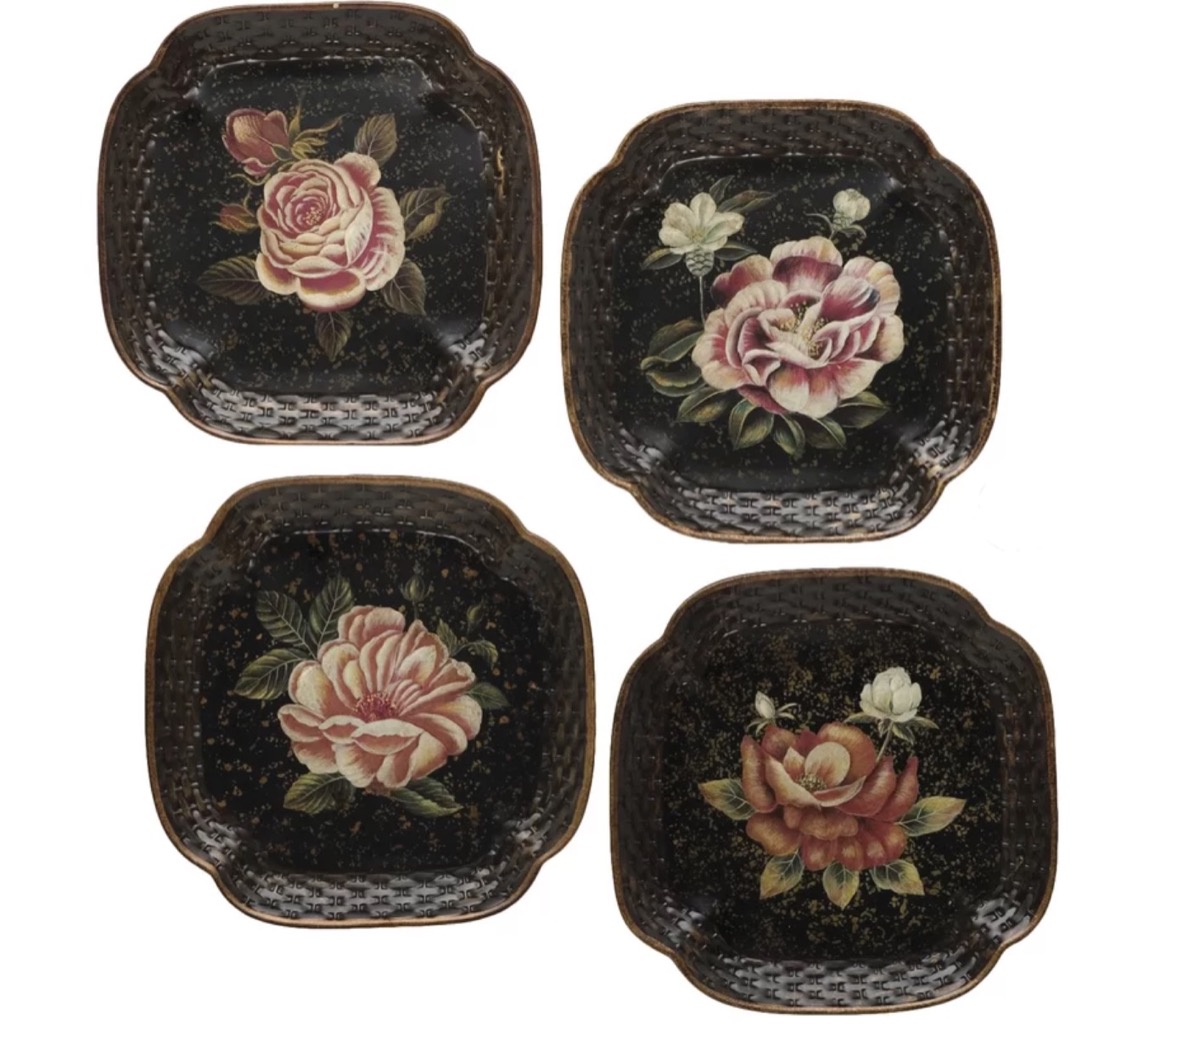 black plates with roses on them, old fashioned home items